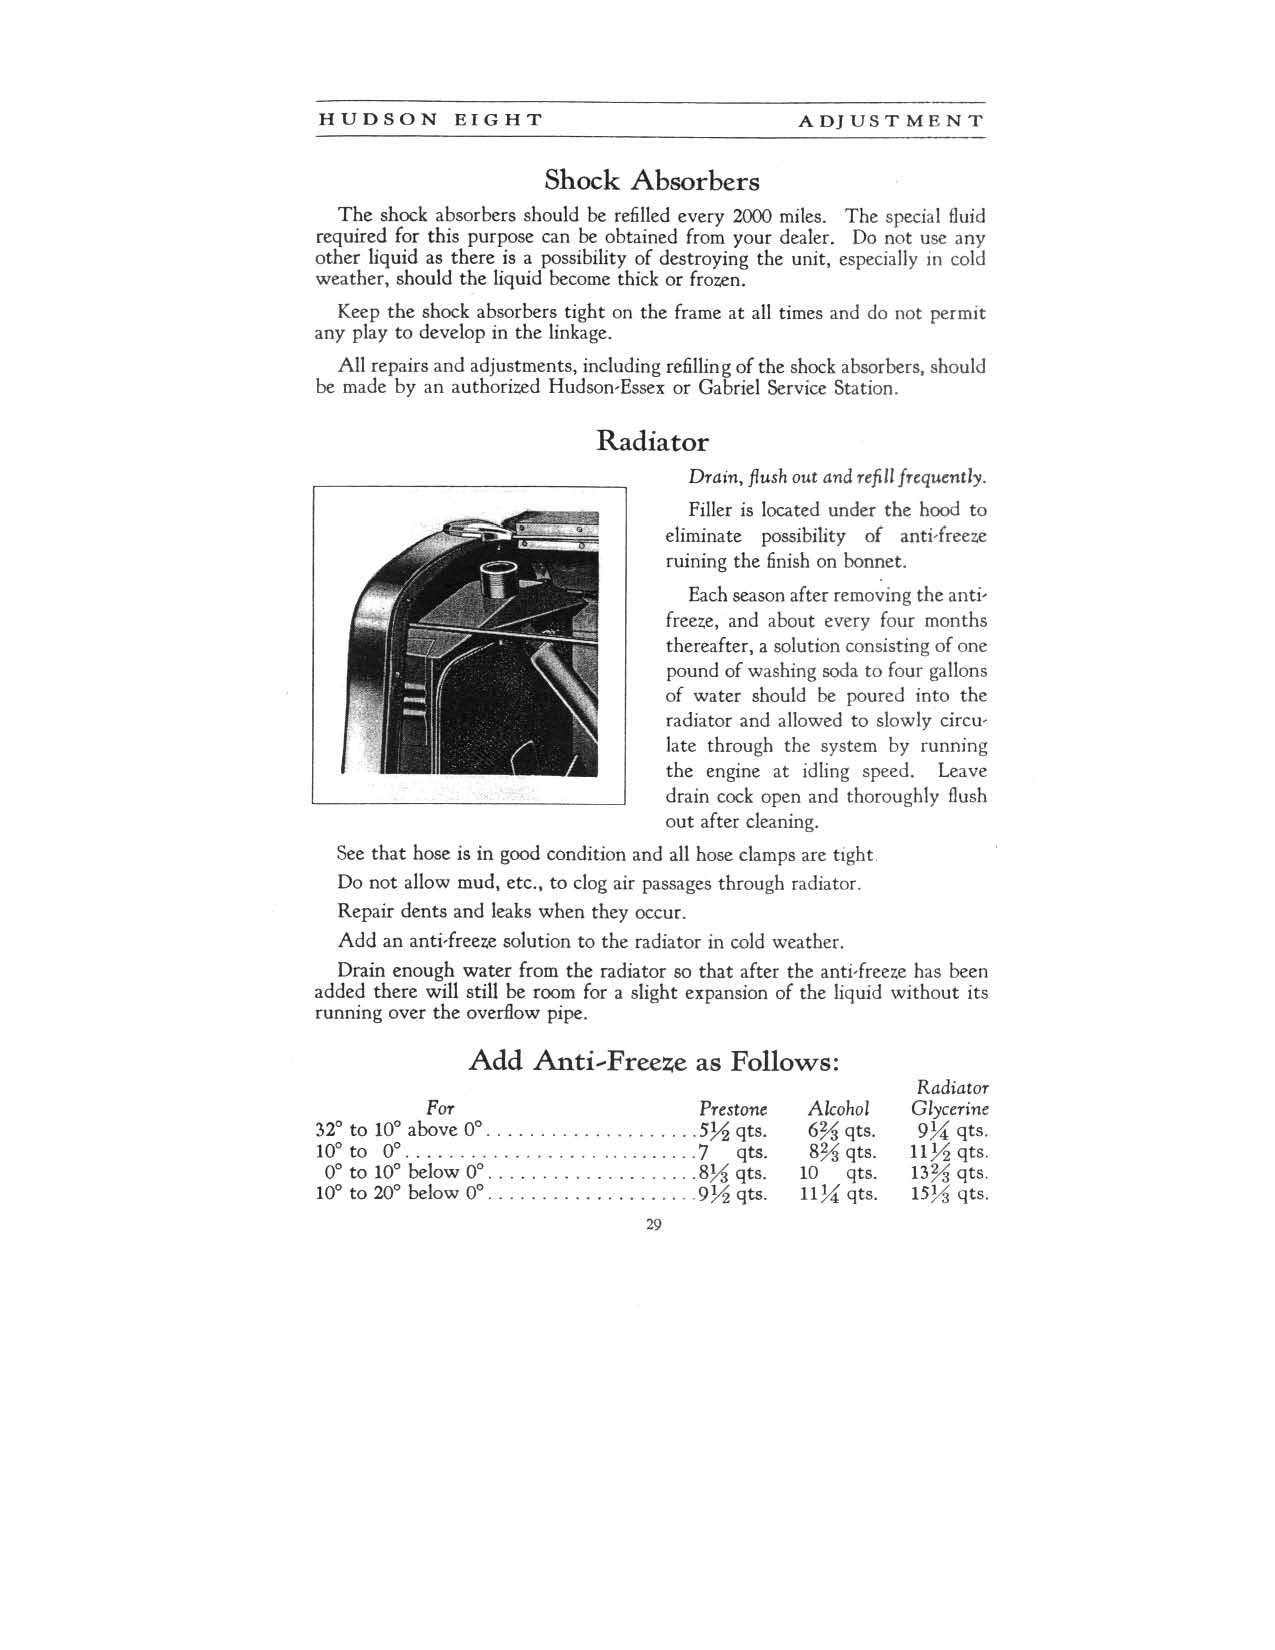 1931 Hudson 8 Instruction Book Page 7